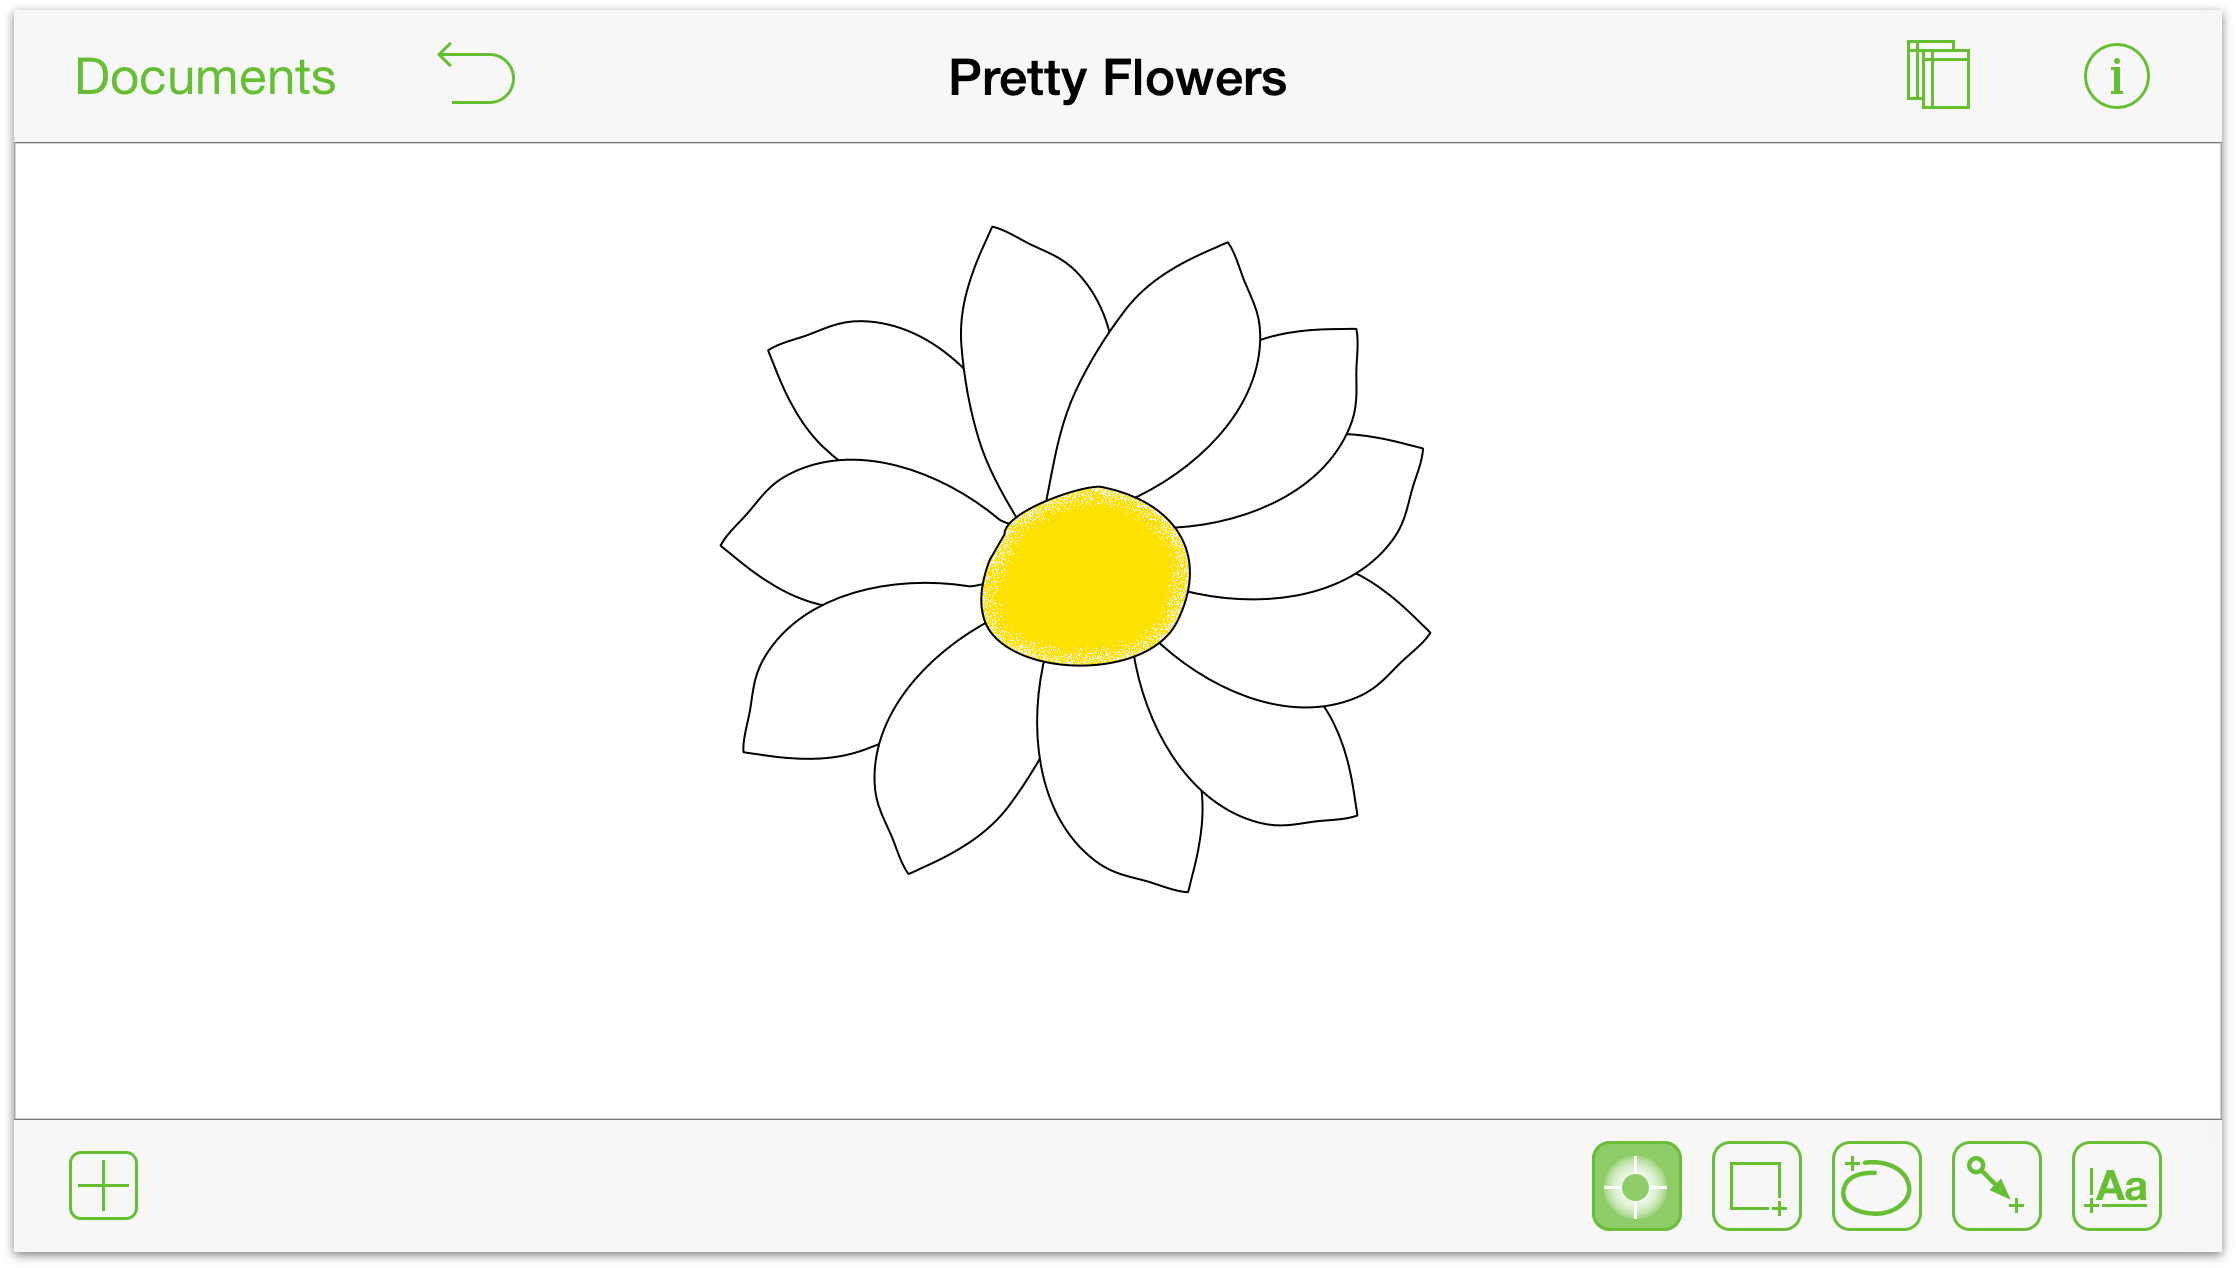 A drawing of a flower, created in OmniGraffle